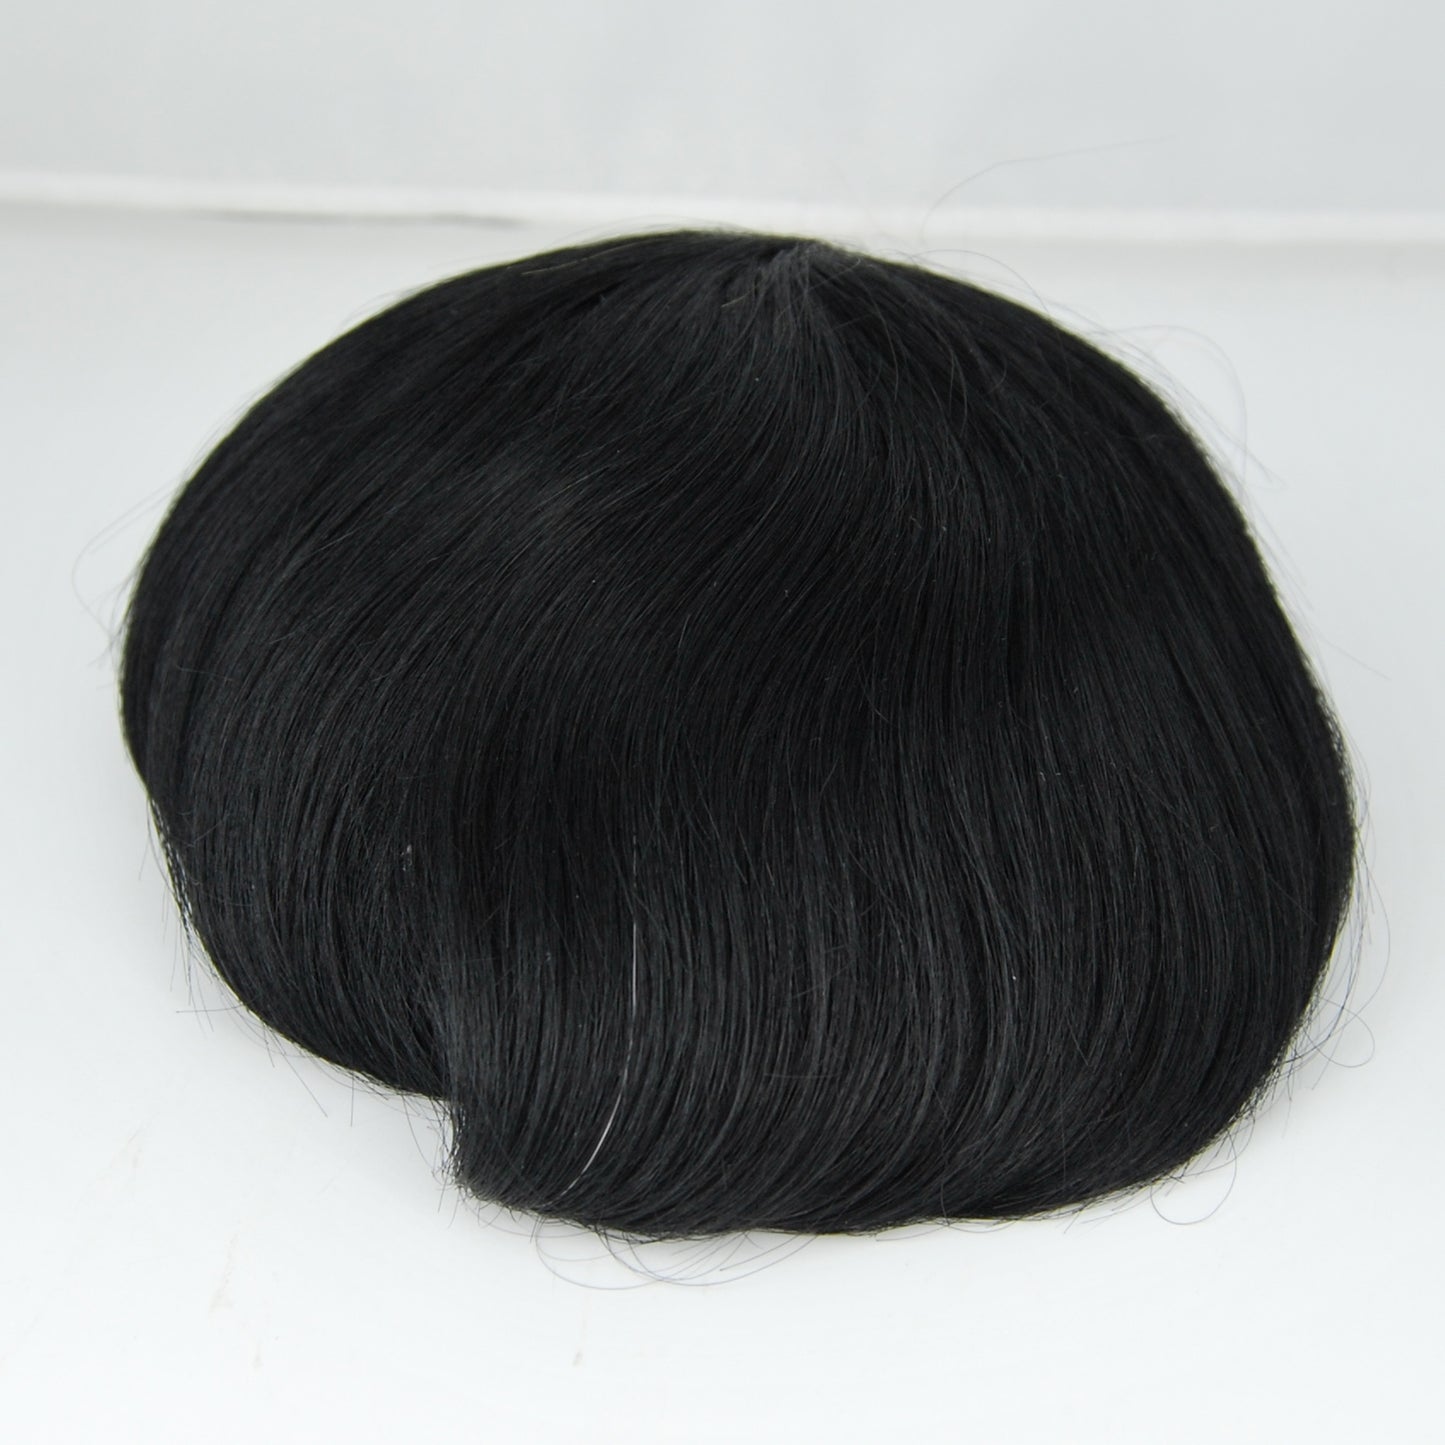 Clearance #1 jet black toupee 9x6.5" French with PU around narrow lace front 9x7" human hair system for men